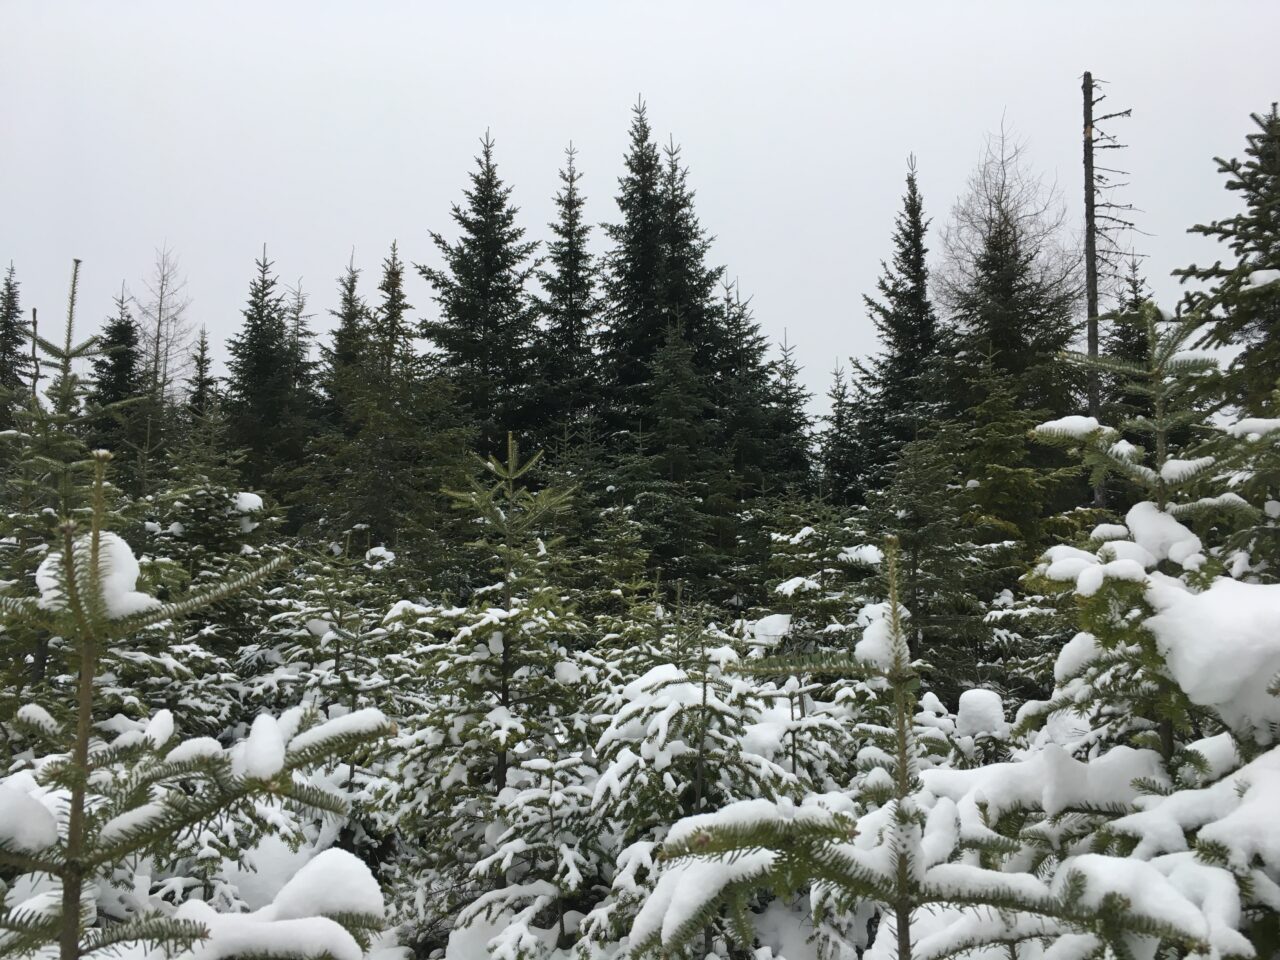 Image of trees with a light snow cover and a cloudy sky.